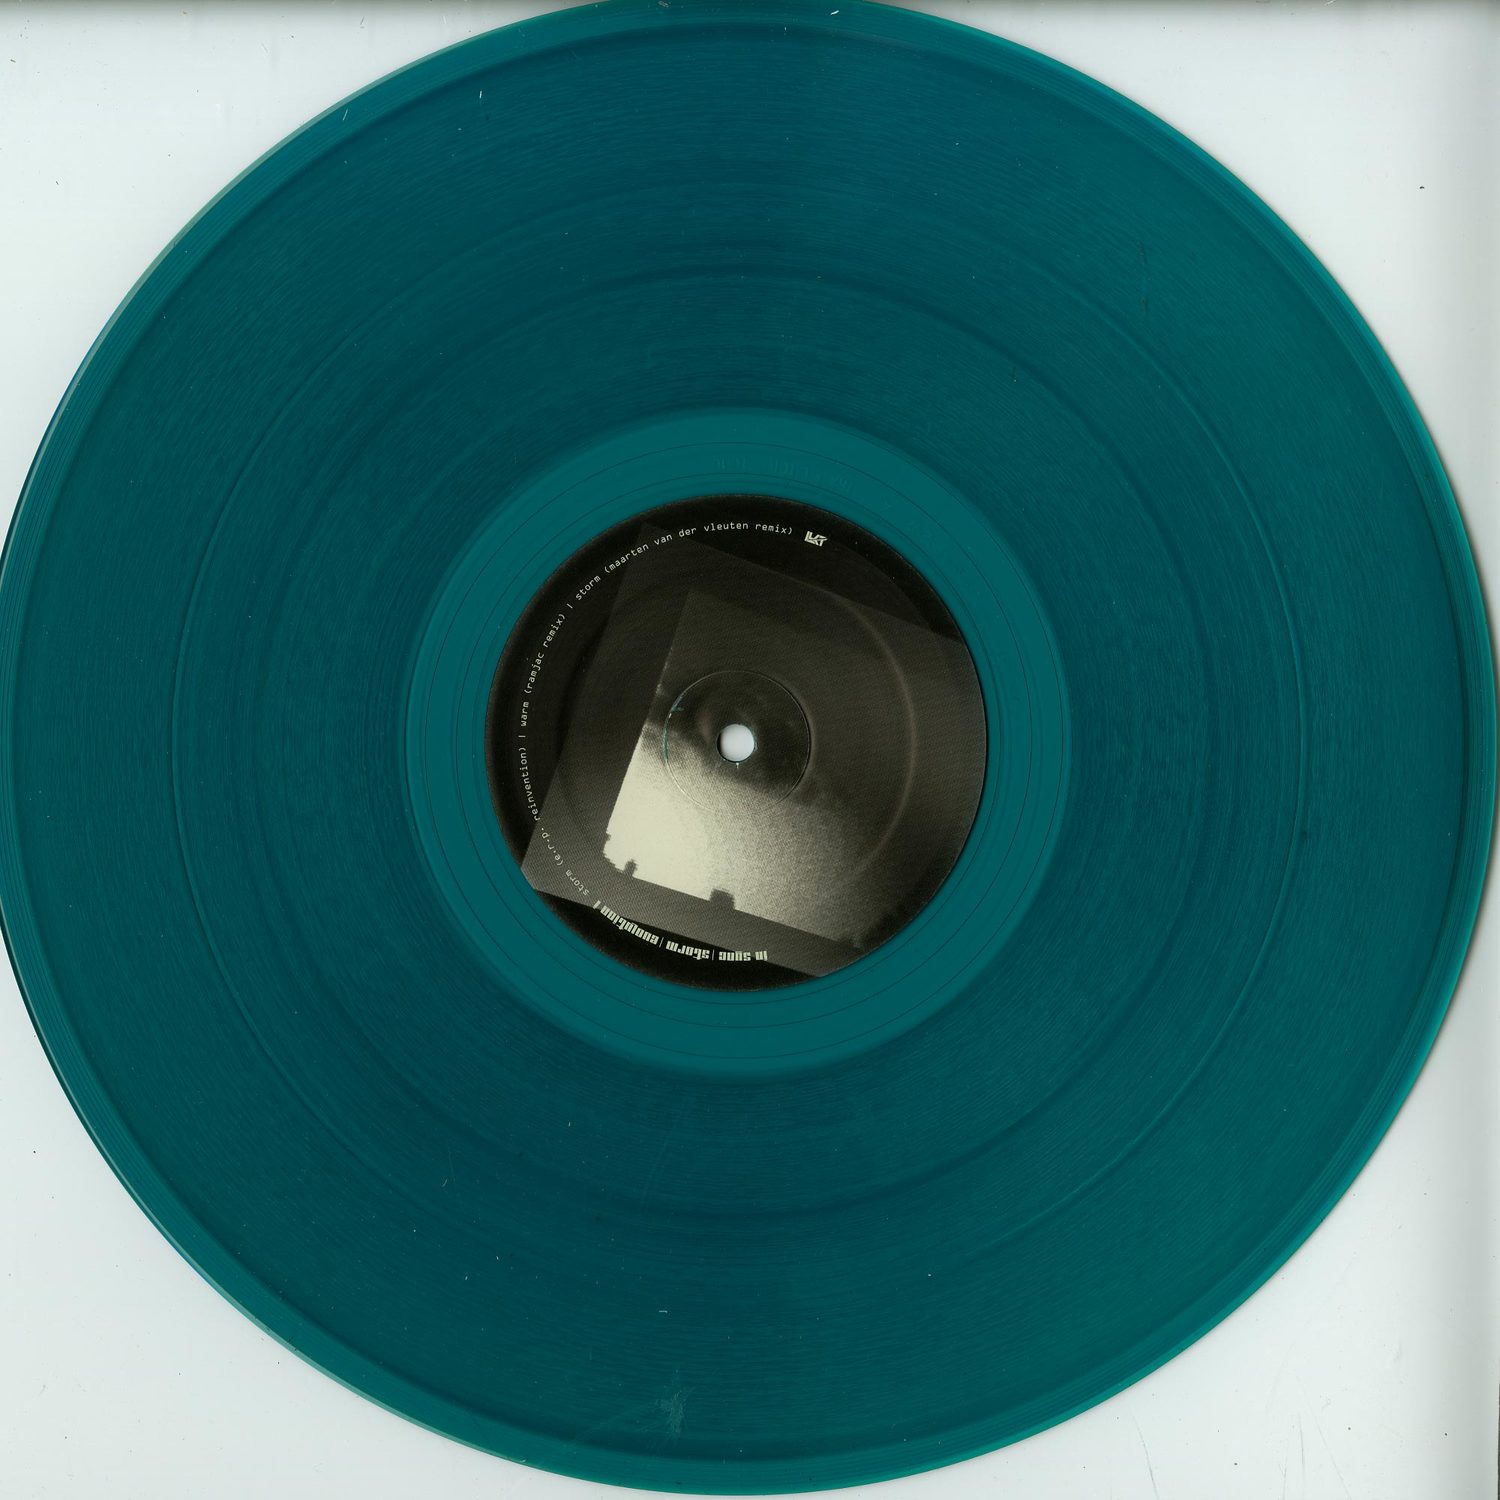 In Sync - storm - evolution i (clear green vinyl)